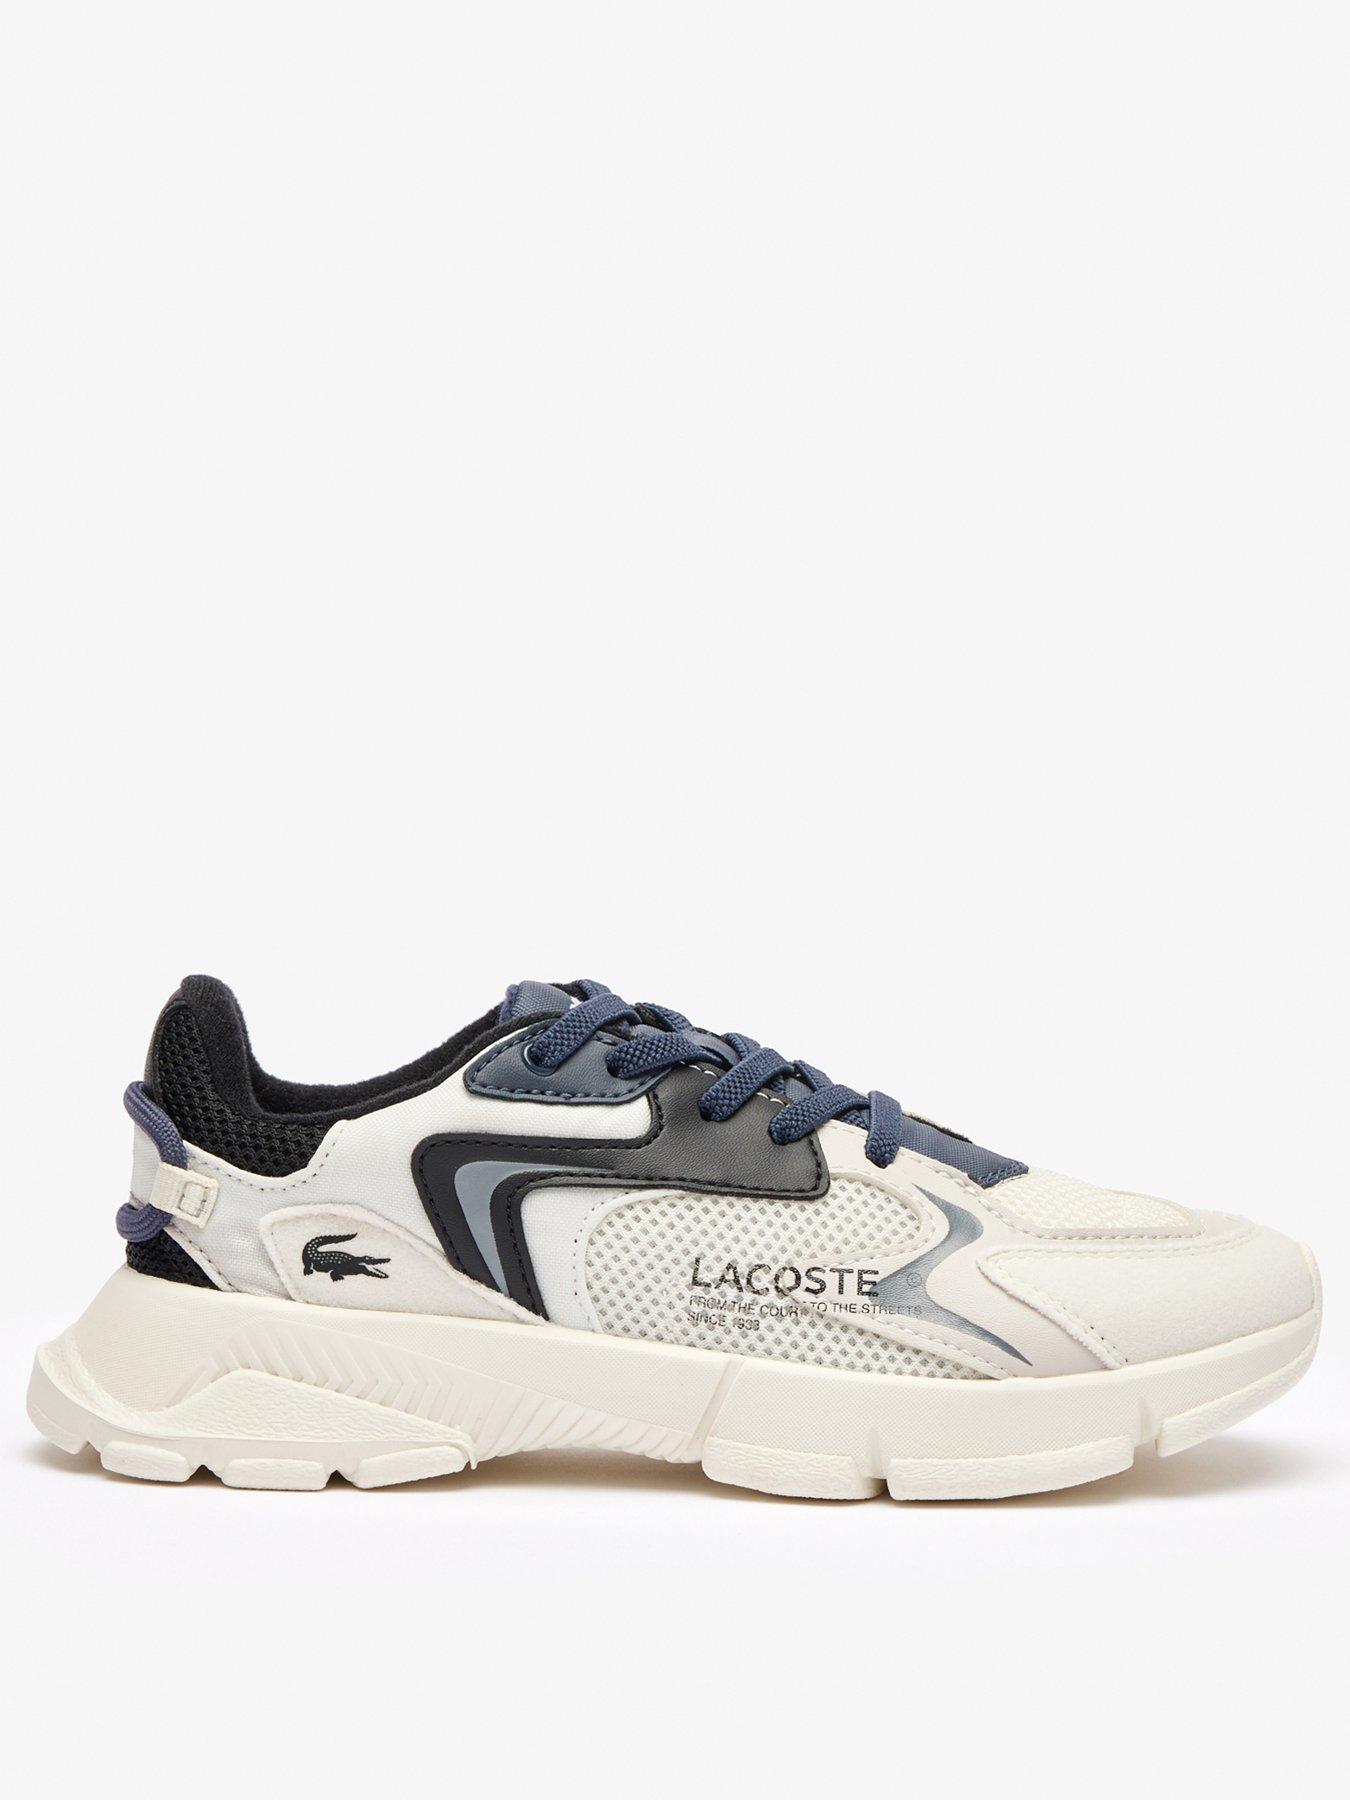 Lacoste Neo 124 Trainer, White, Size 13 Younger